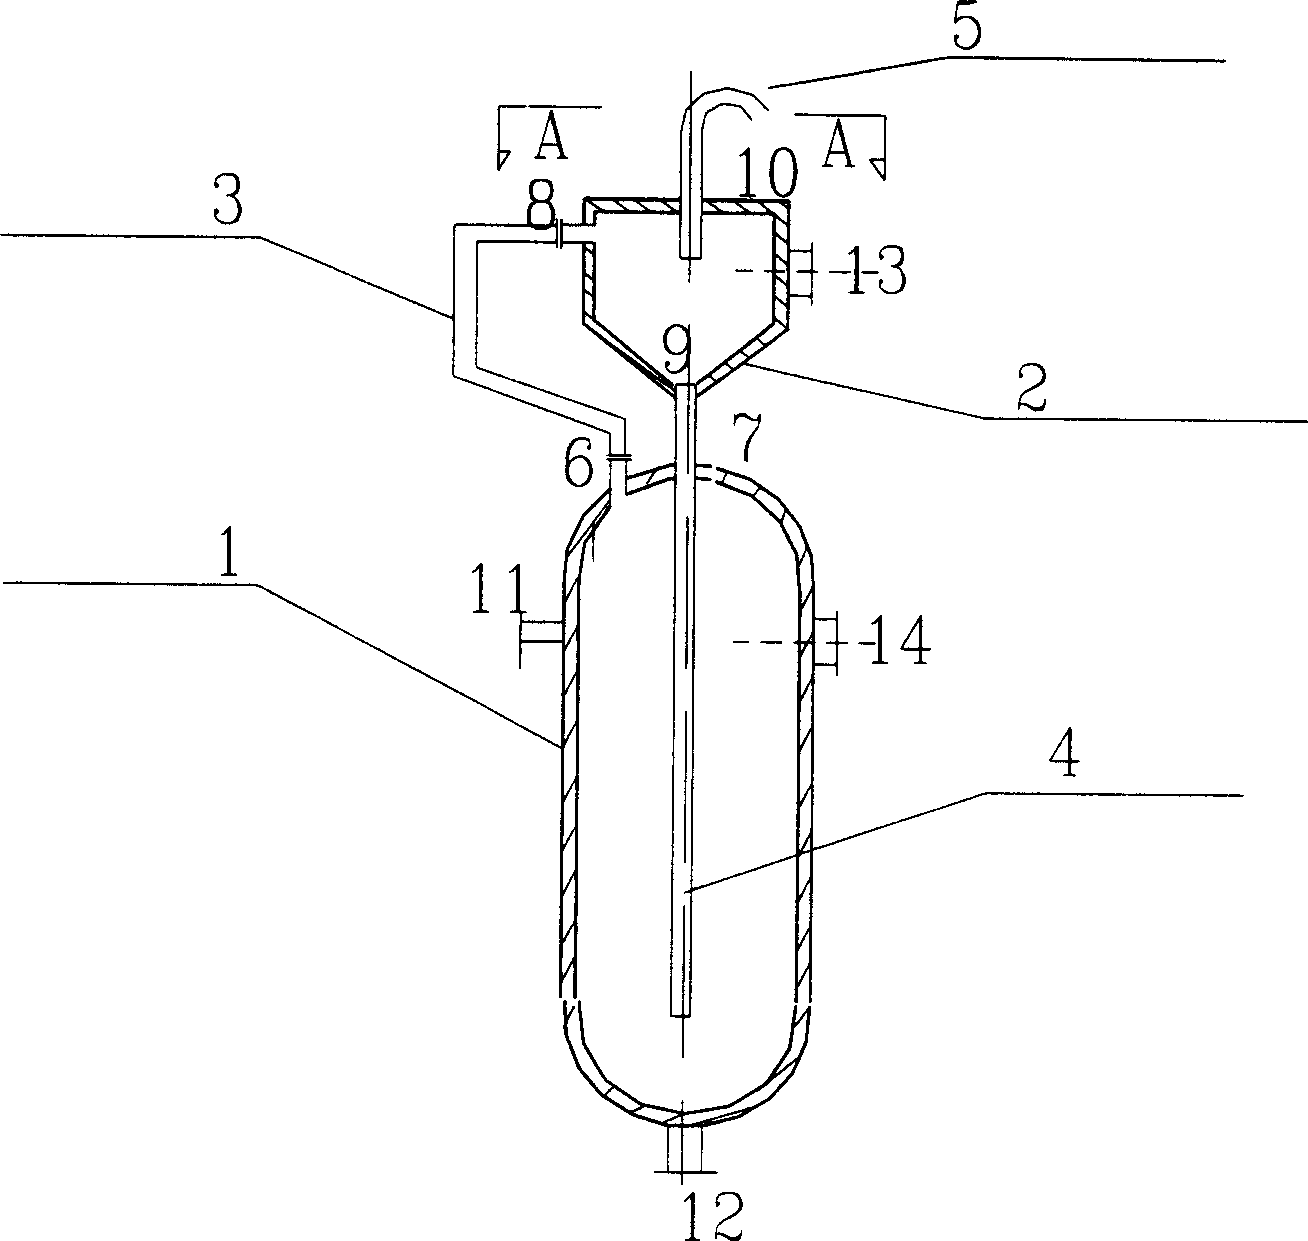 Heat carrier set in blowout prevention type